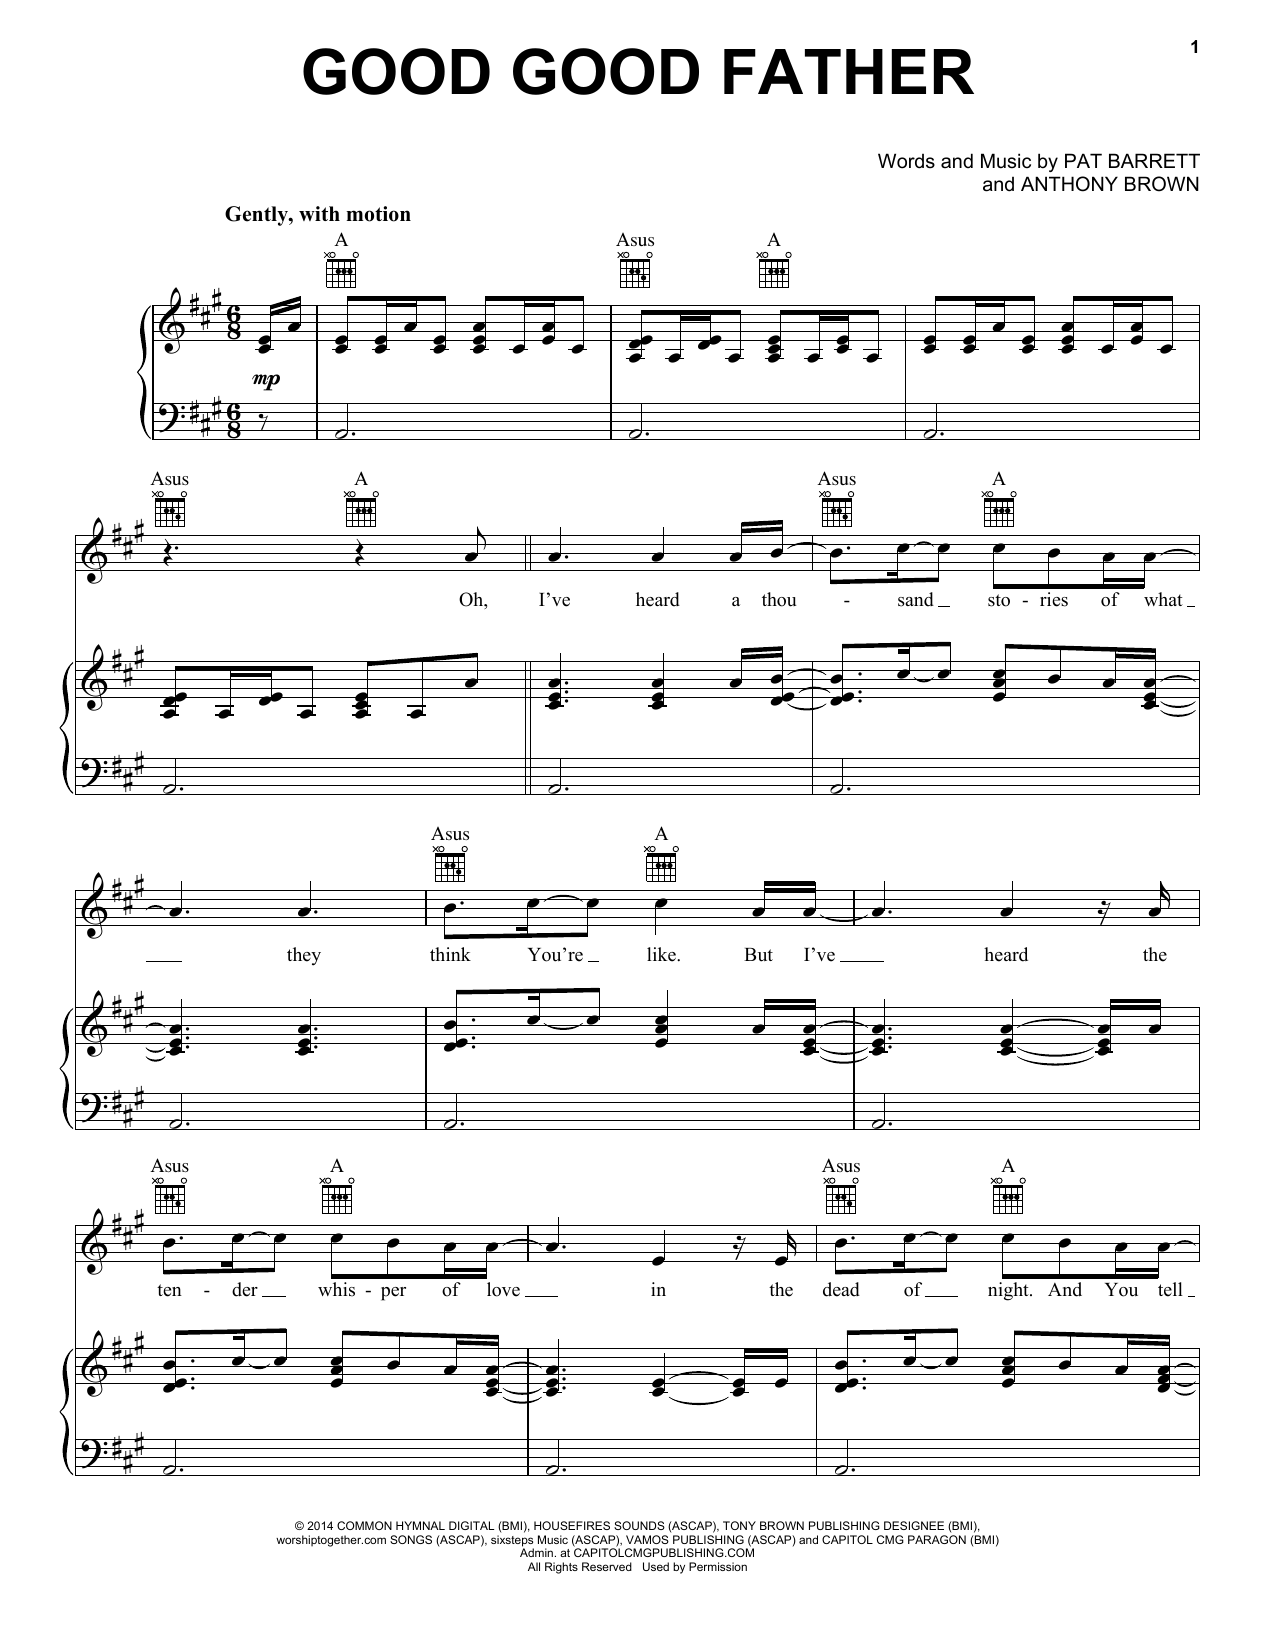 Chris Tomlin Good Good Father sheet music notes and chords. Download Printable PDF.